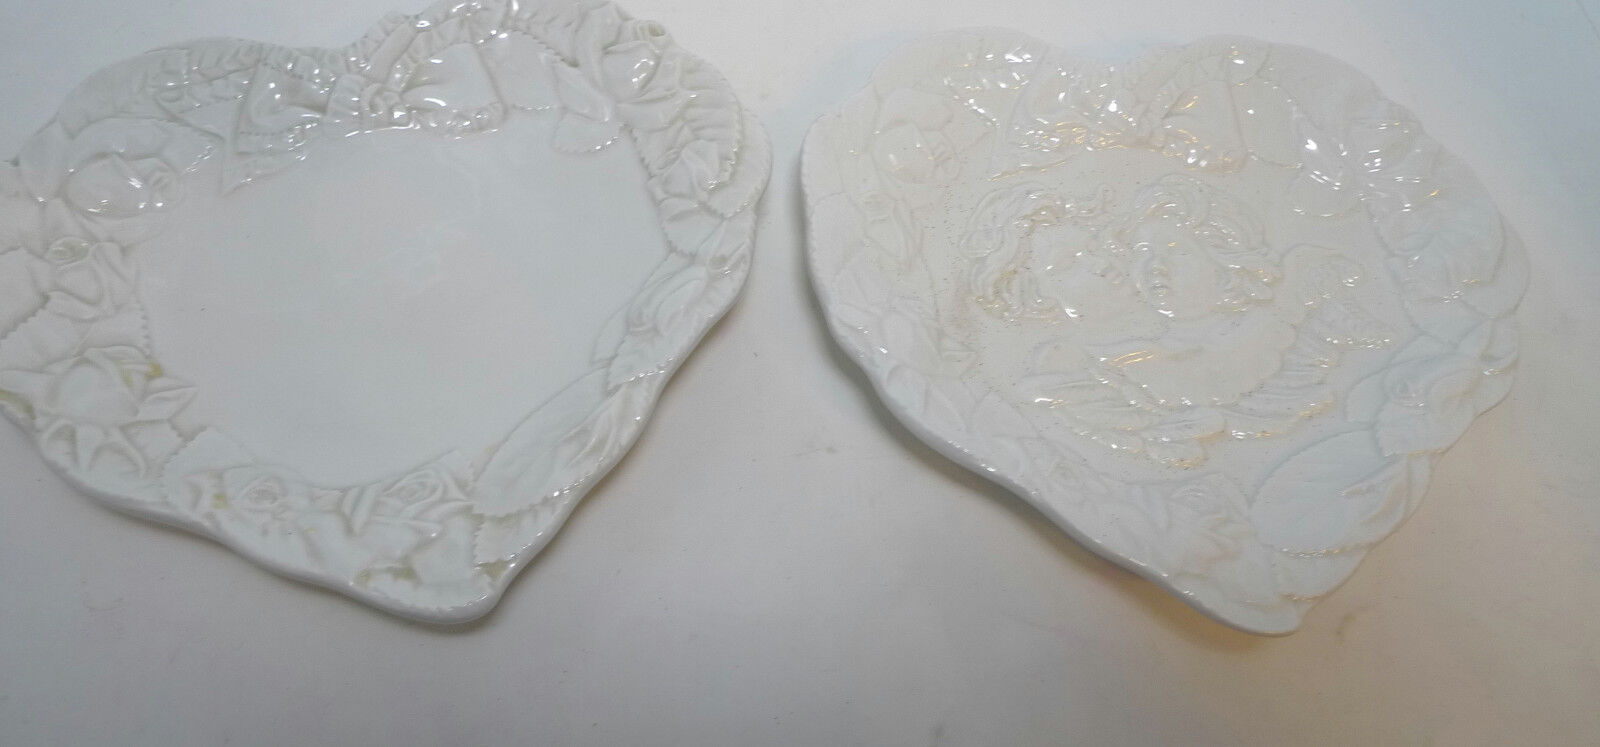 ##Valentine Collectible Lot 2 White Cupid Heart Serving Plates ITALY 9263 7360